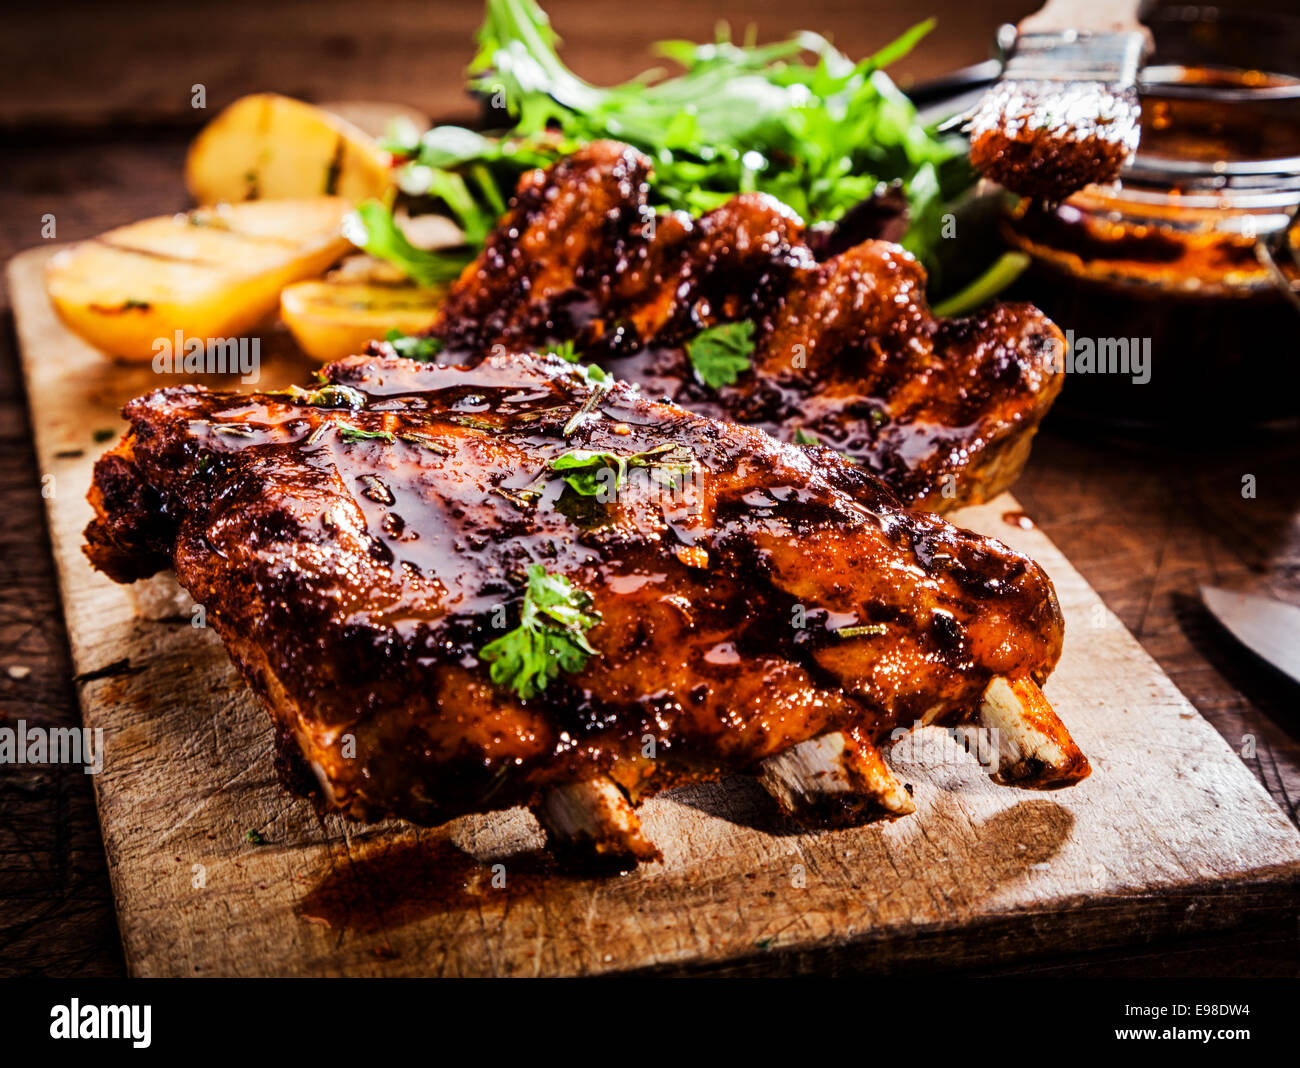 Delicious barbecued ribs seasoned with a spicy basting sauce and served with chopped fresh herbs on an old rustic wooden chopping board in a country kitchen Stock Photo